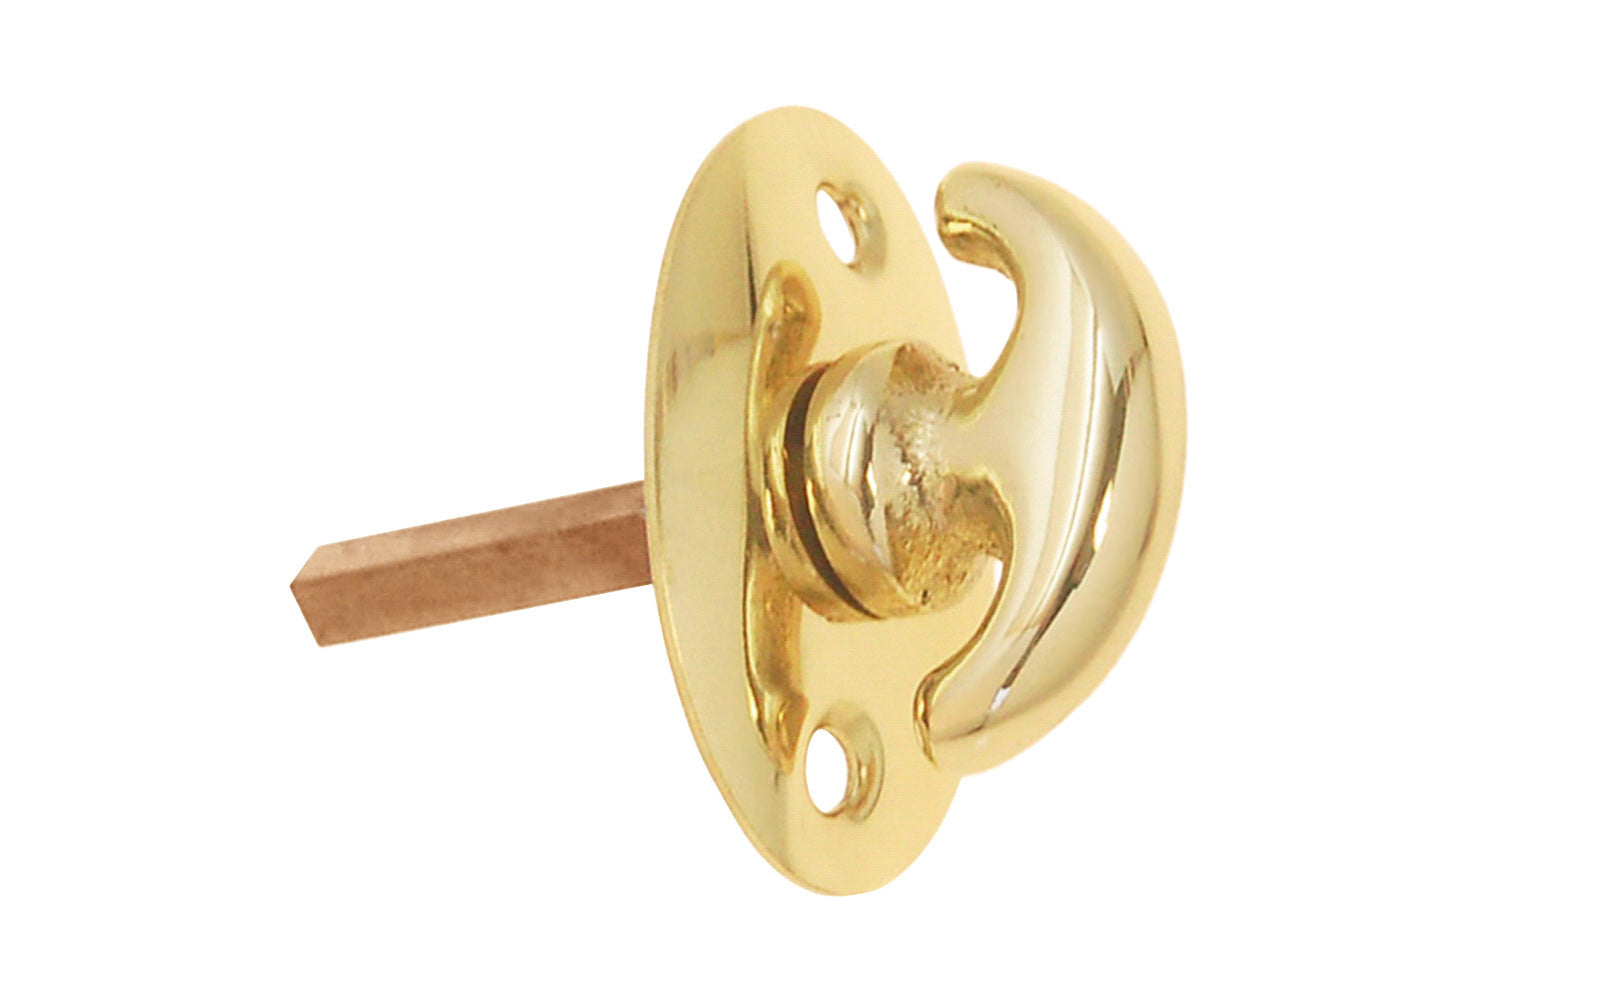 An old-style Classic Solid Brass crescent thumbturn for locking doors. Used with mortise locks, deadbolts, night-locks, catches. Made of solid brass material. 3/16" thick shaft.  Lacquered Brass Thumbturn